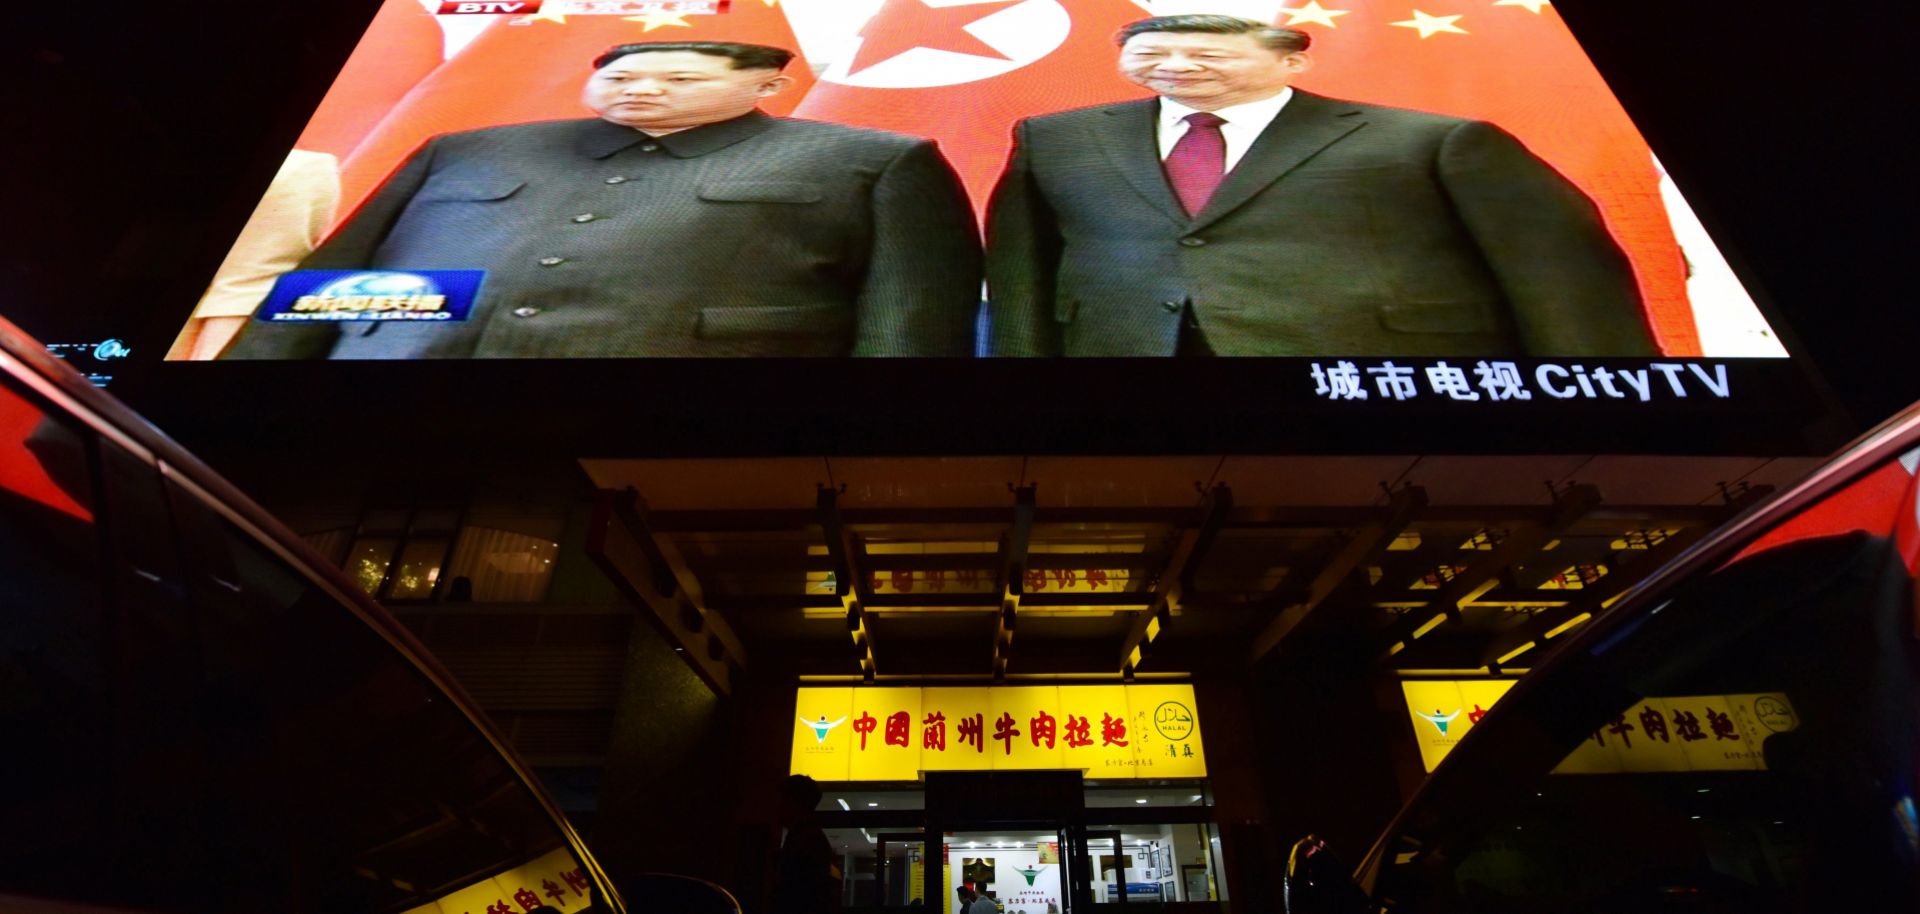 News footage of North Korean leader Kim Jong Un, left, and Chinese President Xi Jinping is shown above a Beijing restaurant on March 28, 2018.